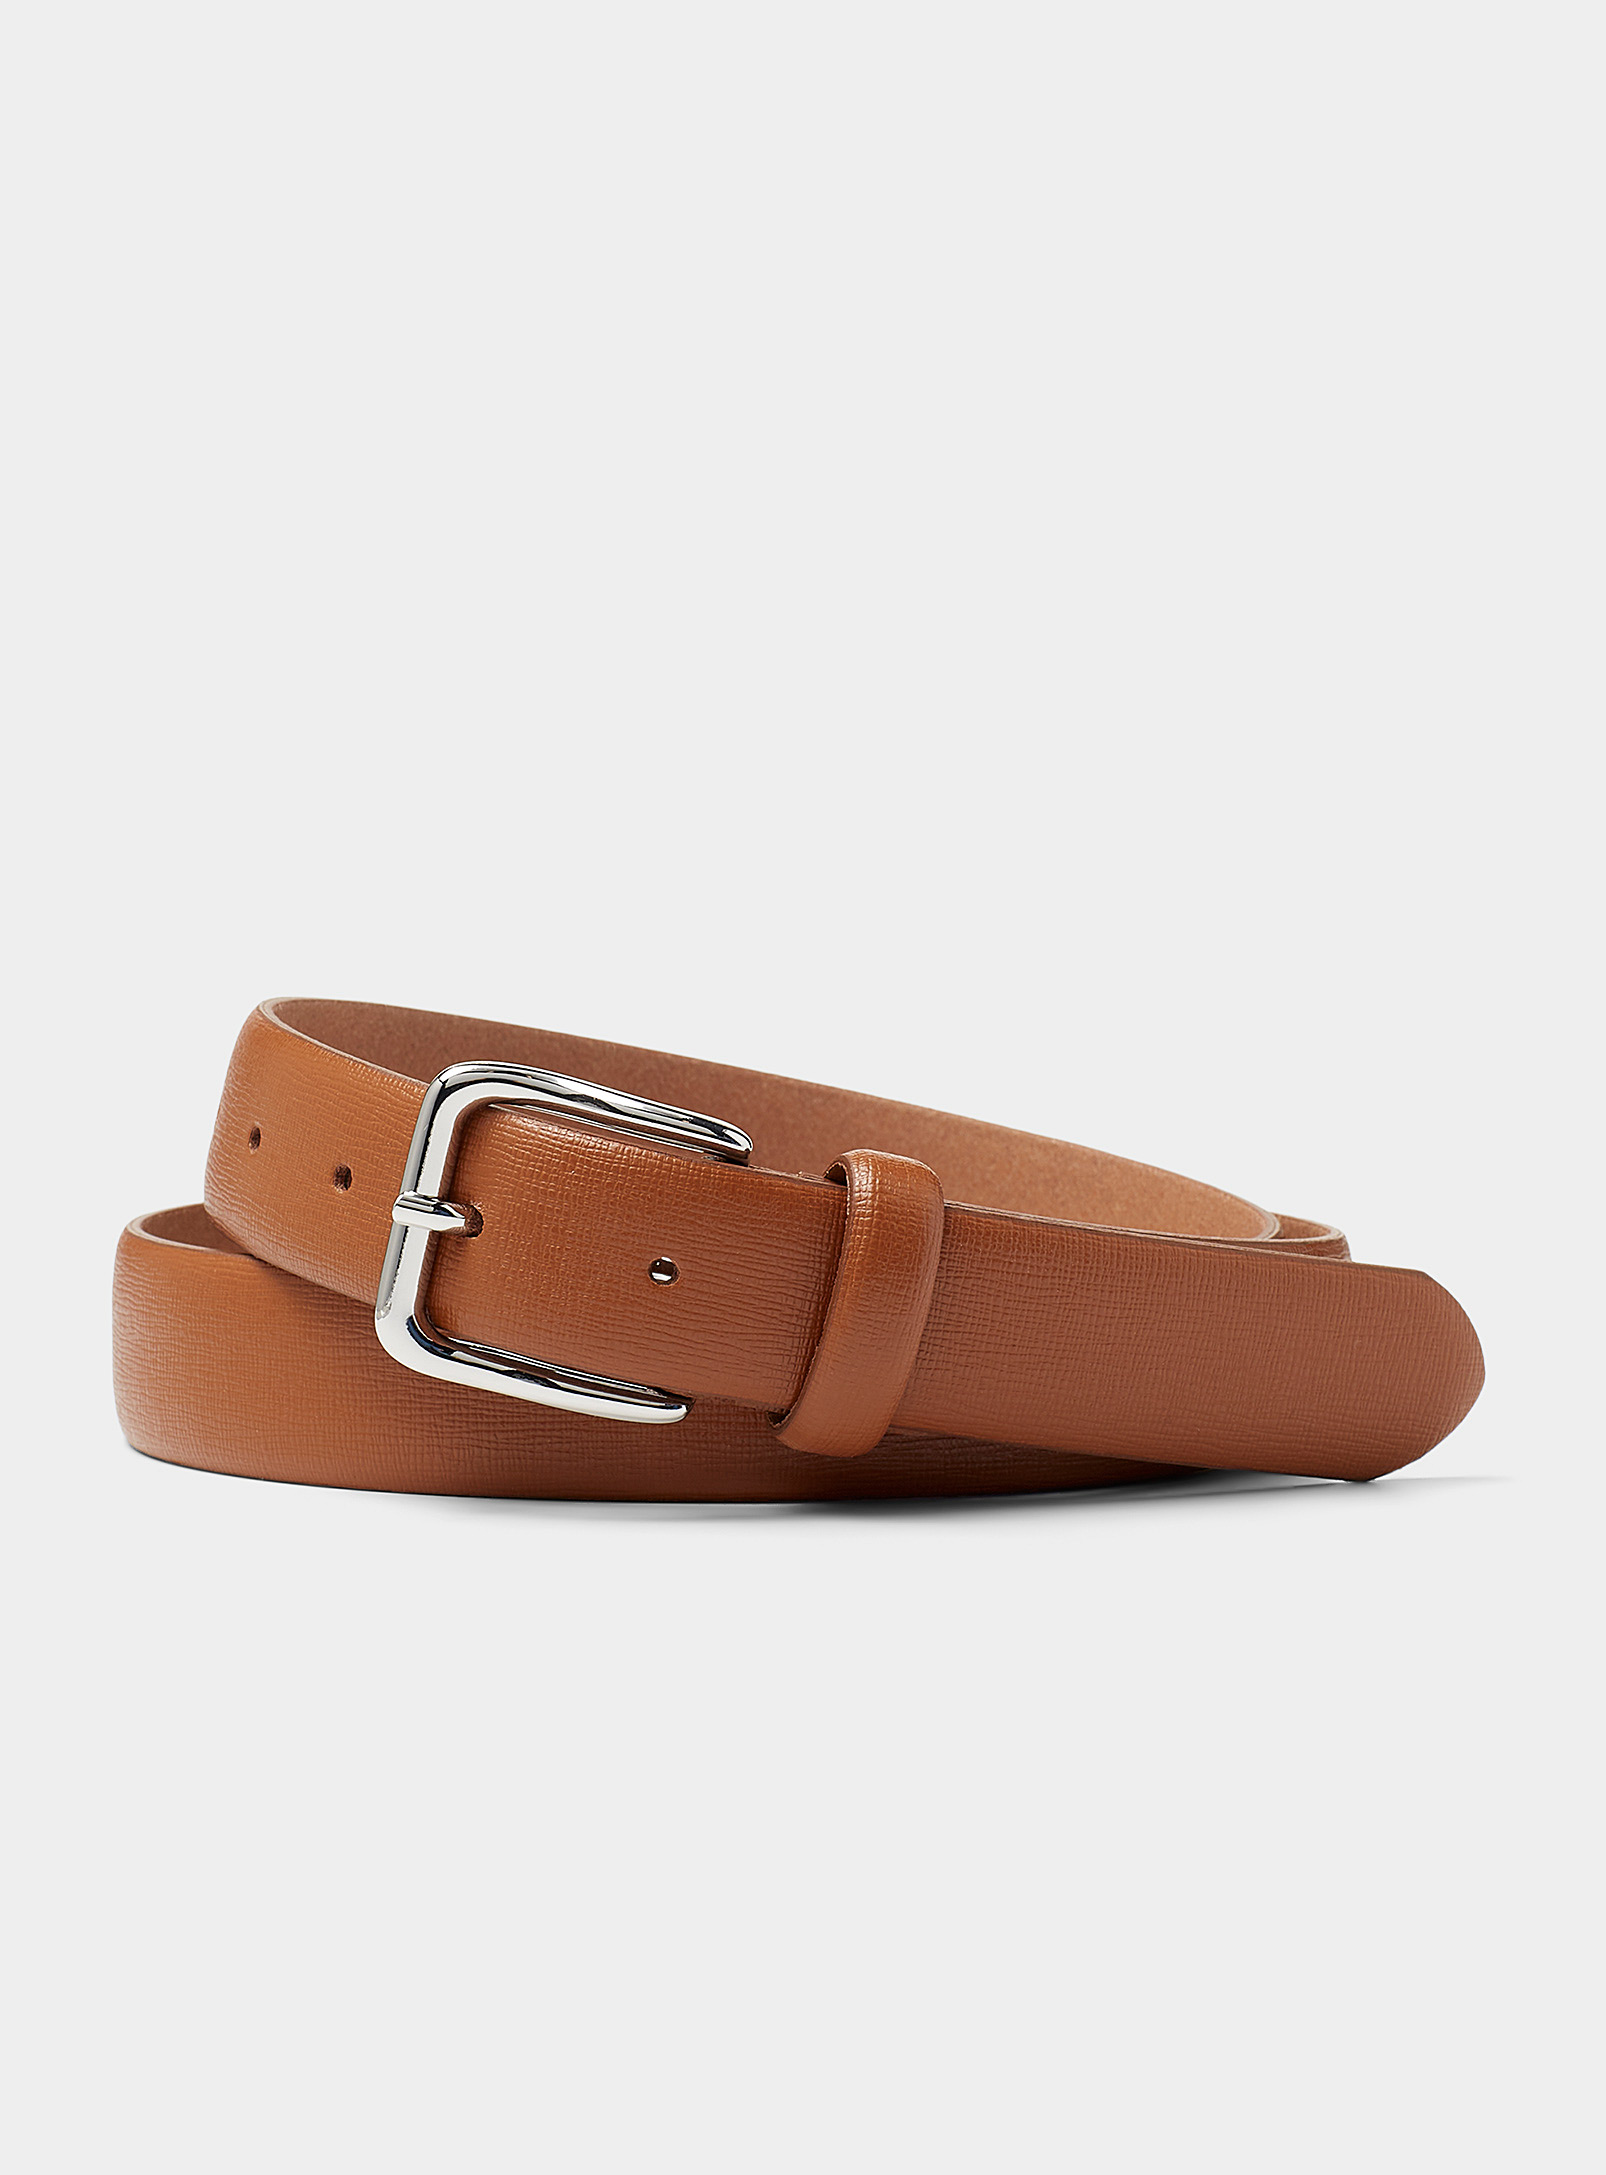 Le 31 Saffiano Leather Belt Exclusive Collection From Italy In Light Brown